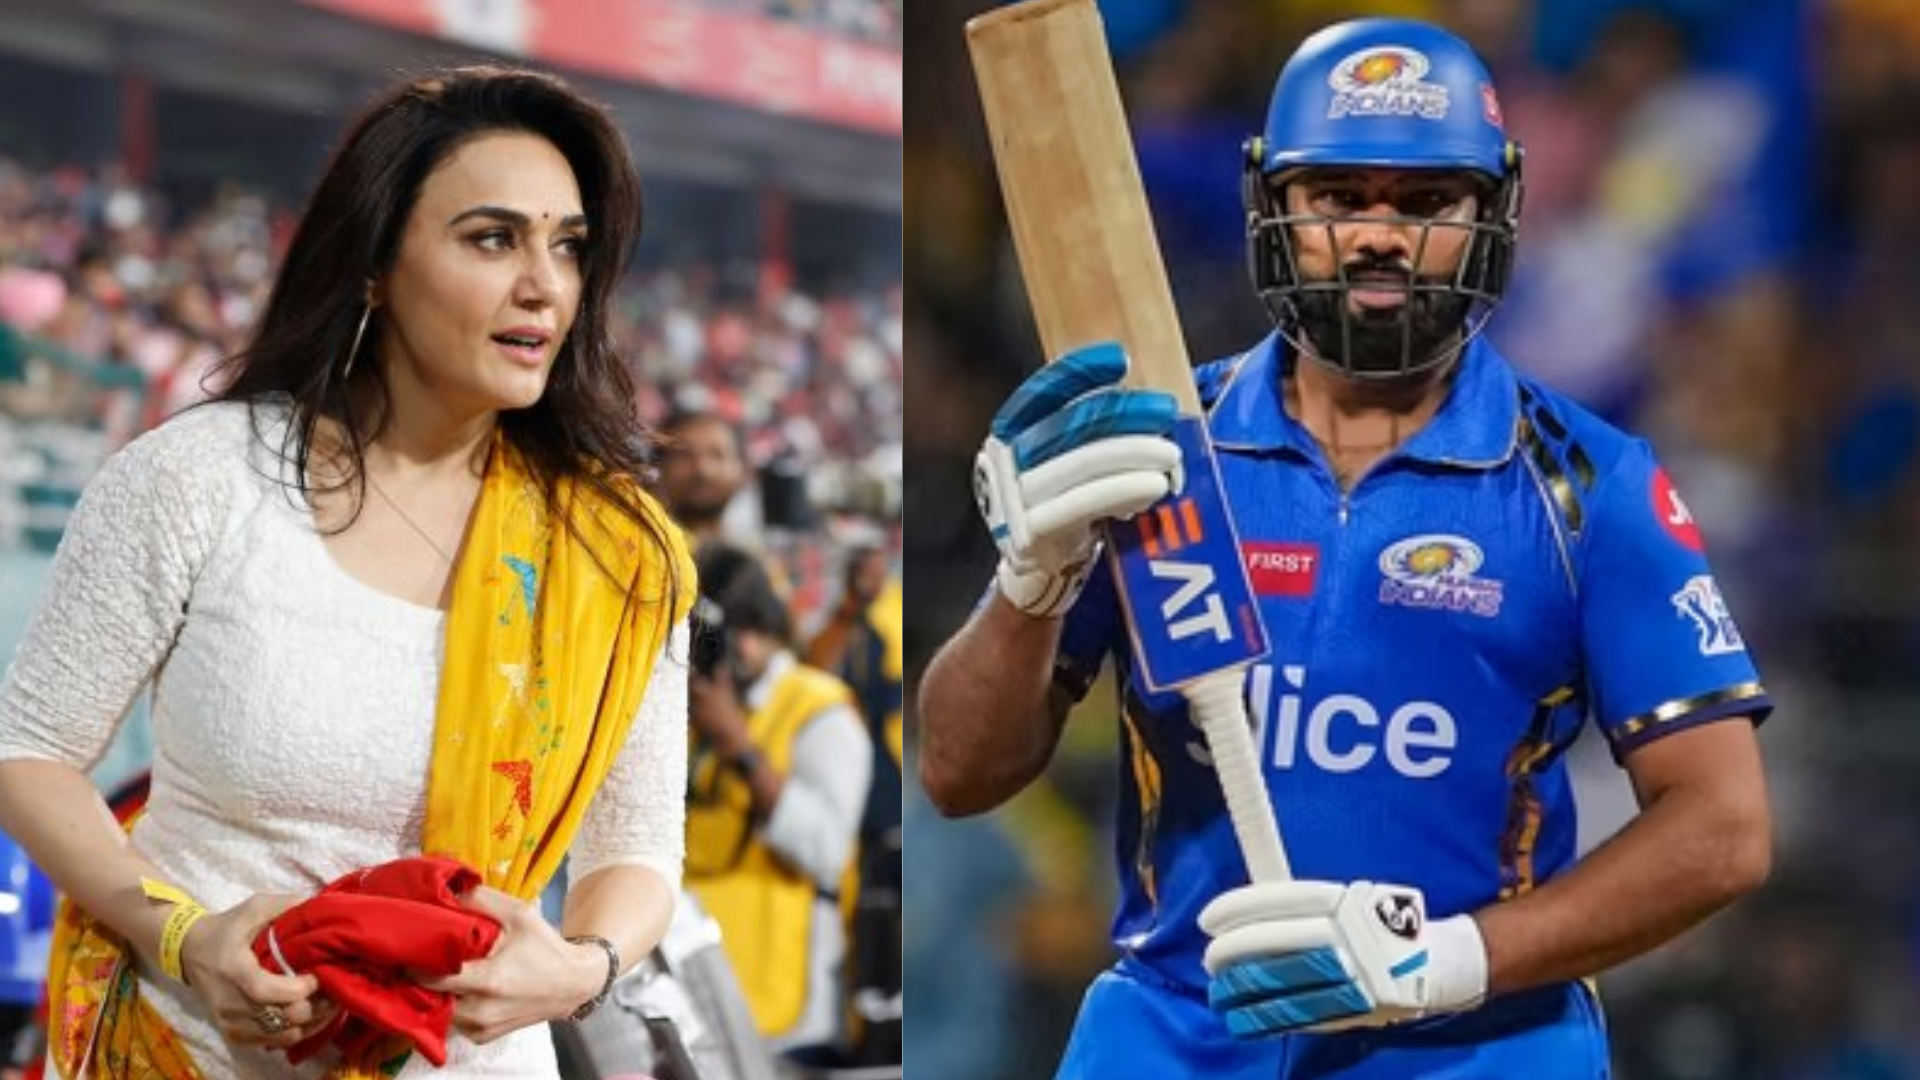 Preity Zinta’s Heartwarming Response To Fan’s Query About Rohit Sharma Goes Viral- See Post !